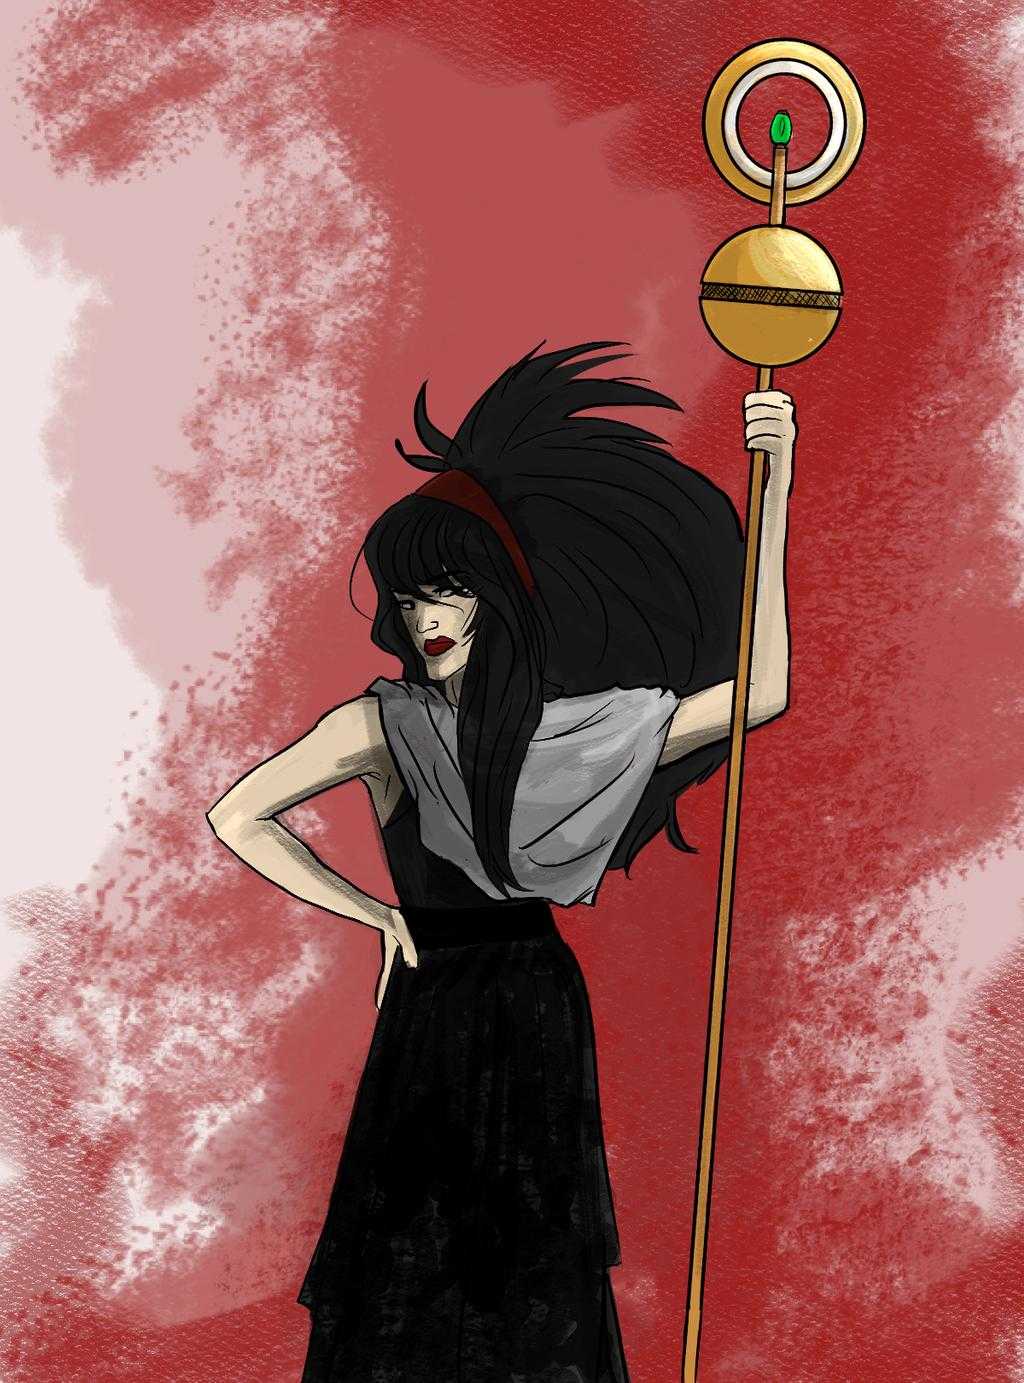 41 Hot Pictures Of Nico Minoru That Will Make You Begin To Look All Starry Eyed At Her 515